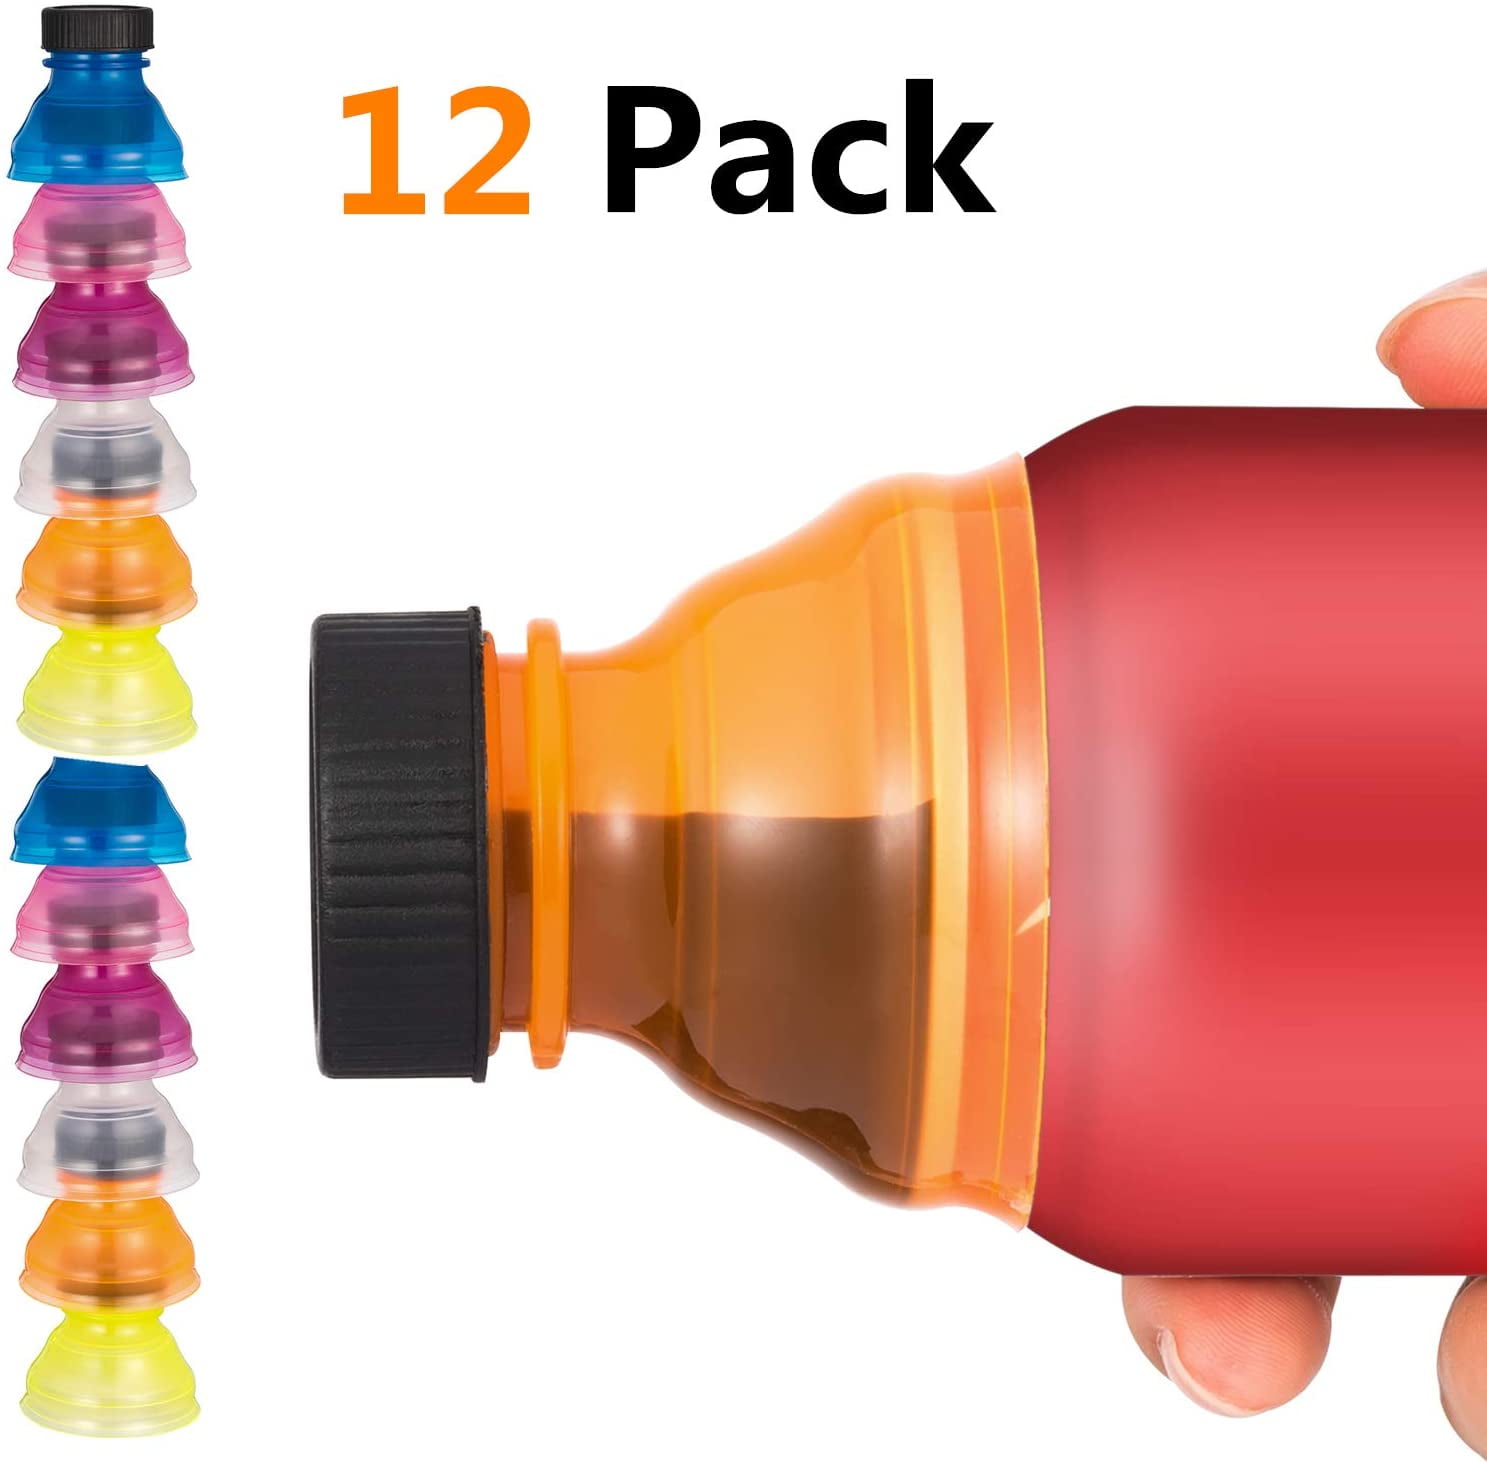 12 PCS Can Covers, Clear Soda Can Lids Cover For Soda Beer Energy Drinks Juice Seltzer Reusable Bottle Lid Caps For Fizzy Drink Accessories Beach Gadgets BPA-Free - Walmart.com